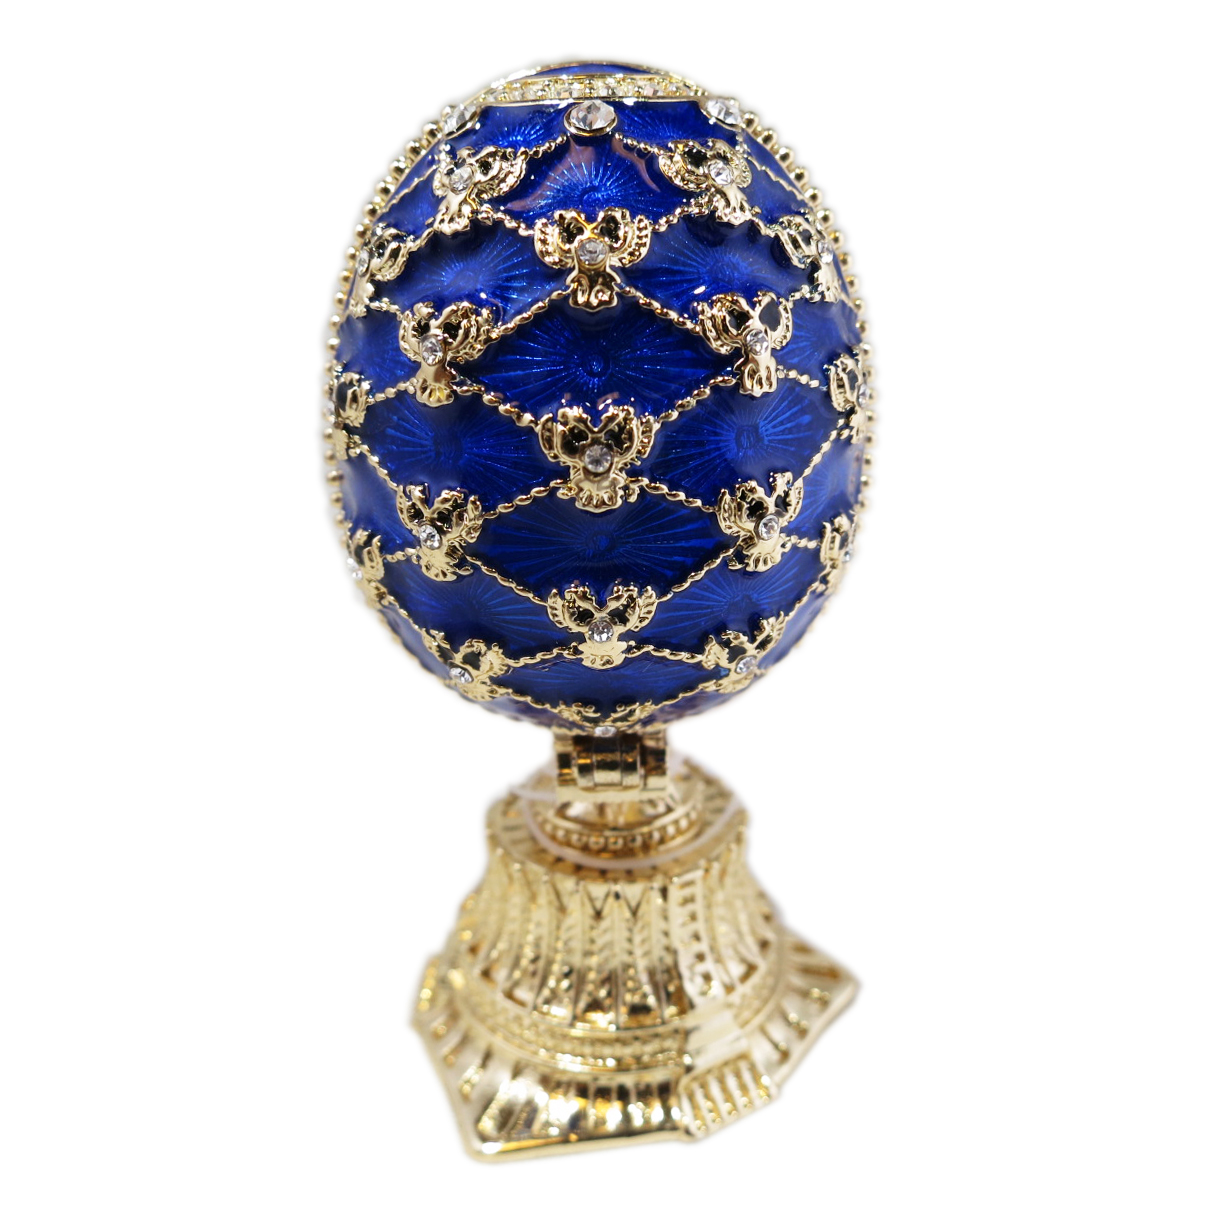 Easter Gift Russian Style Easter Egg with a Miniature of The Church of the Savior on Spilled Blood BLUE, 2.5